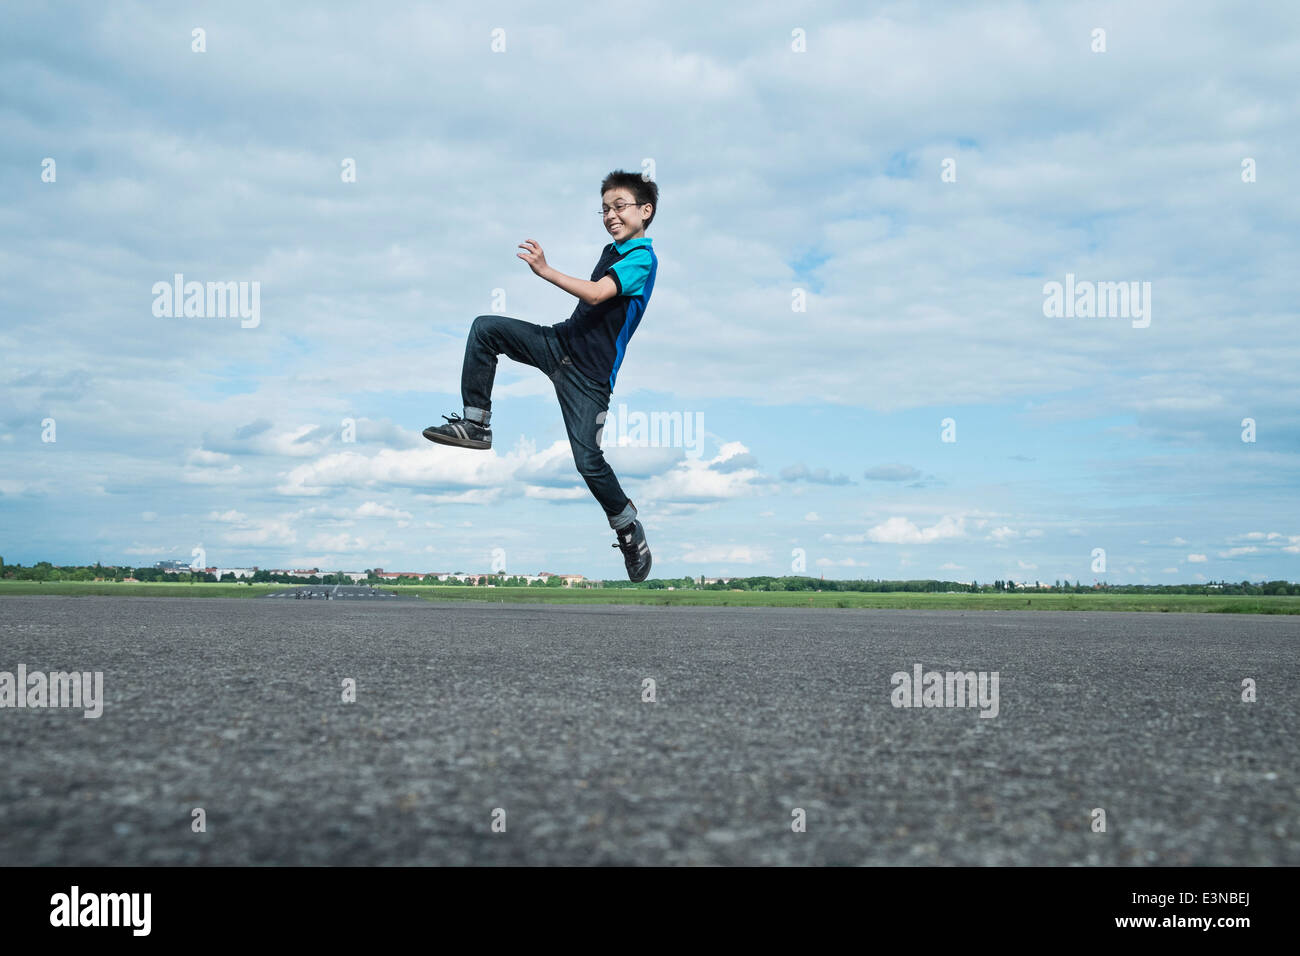 Full length excited boy jumping on road against cloudy sky Stock Photo